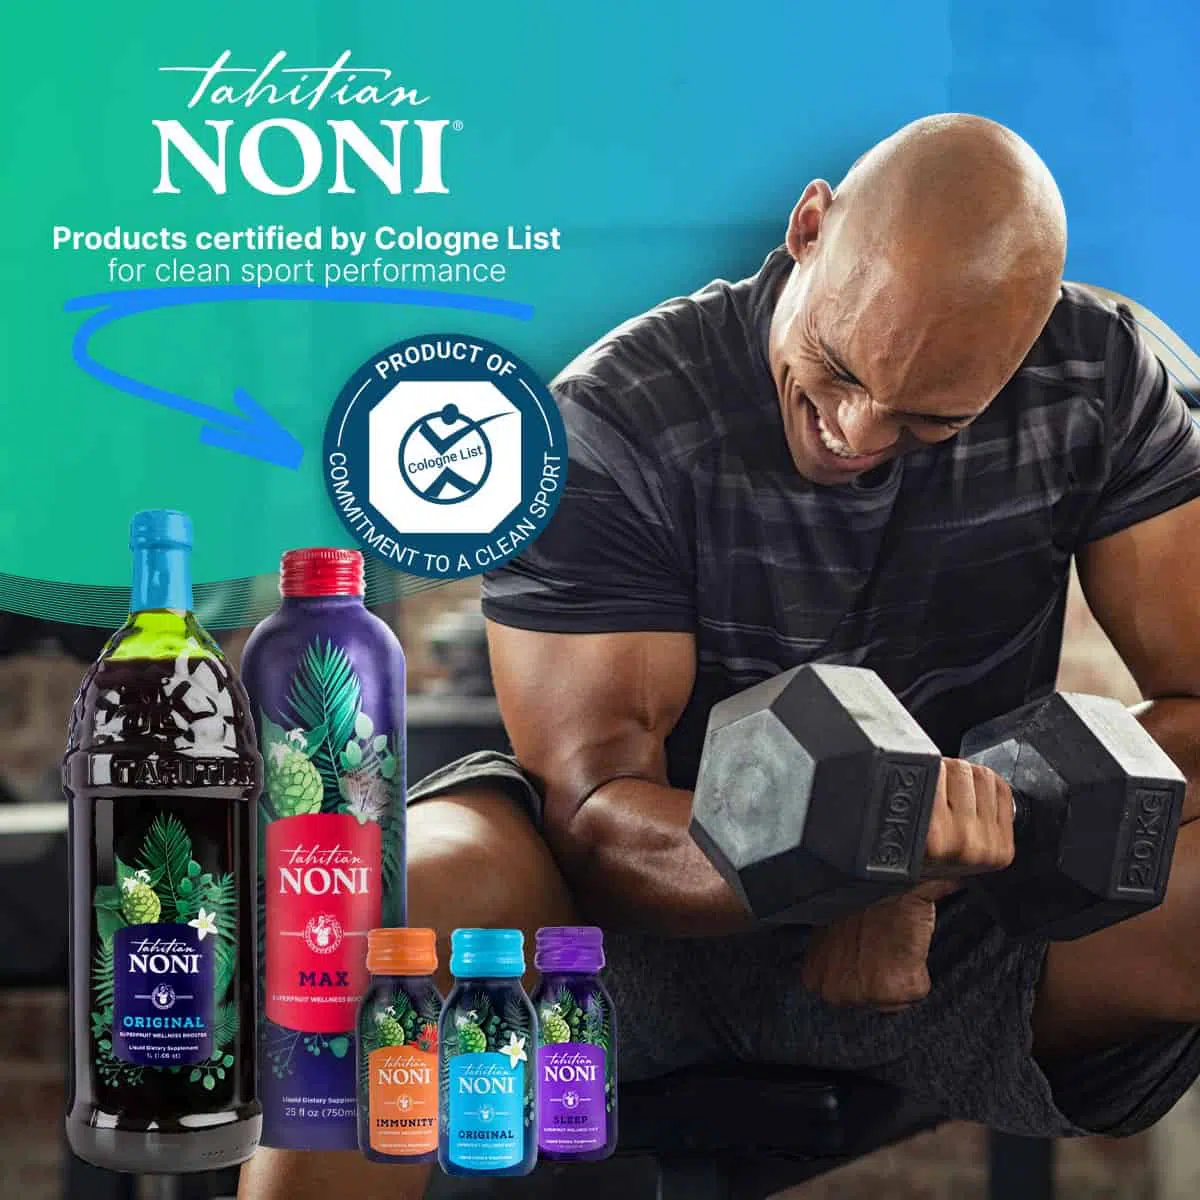 NONI Products Certified by Cologne List